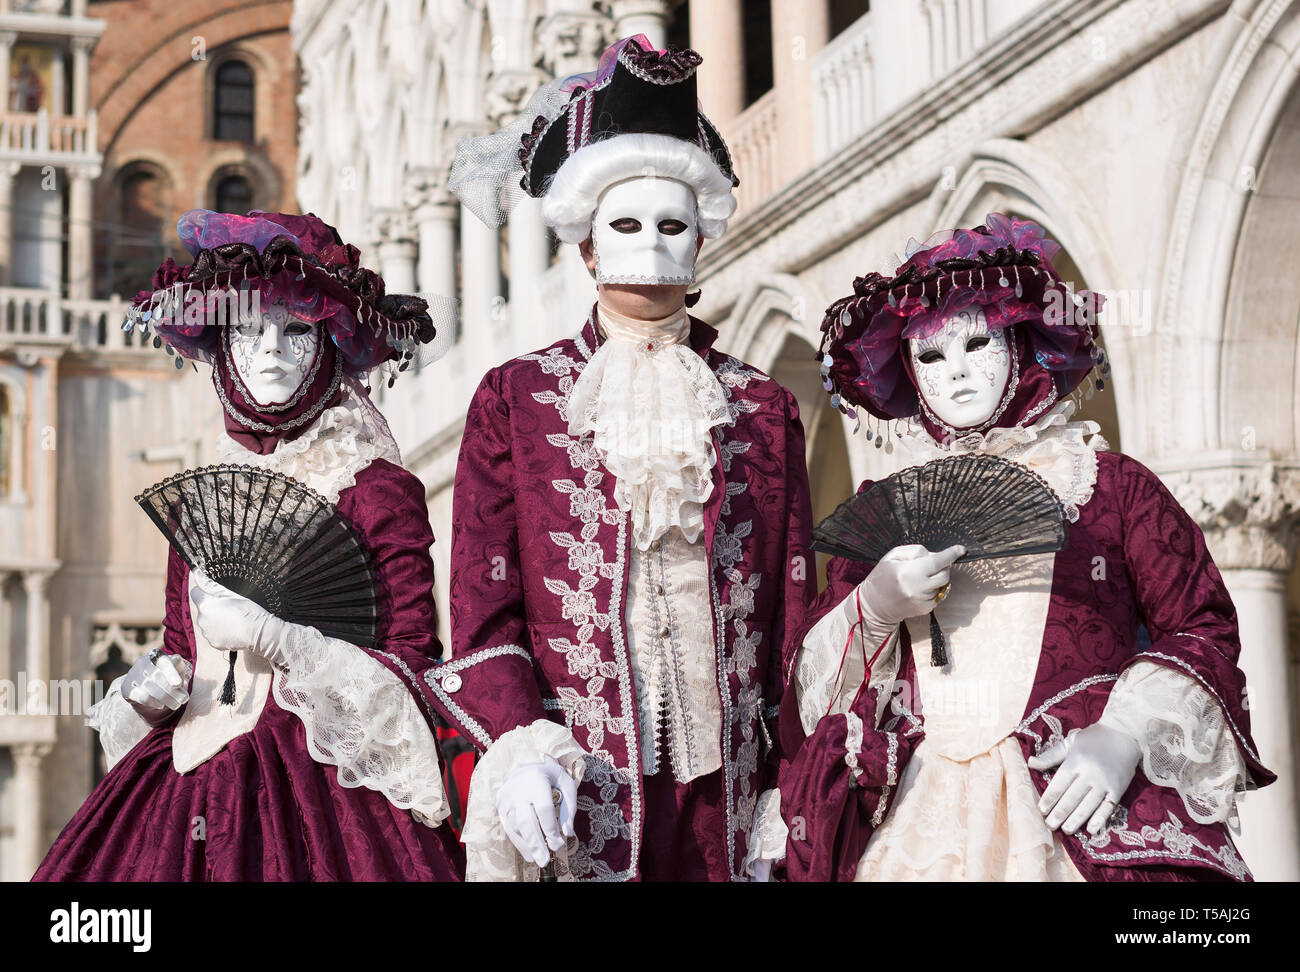 Carnevale di venezia High Resolution Stock Photography and Images - Alamy